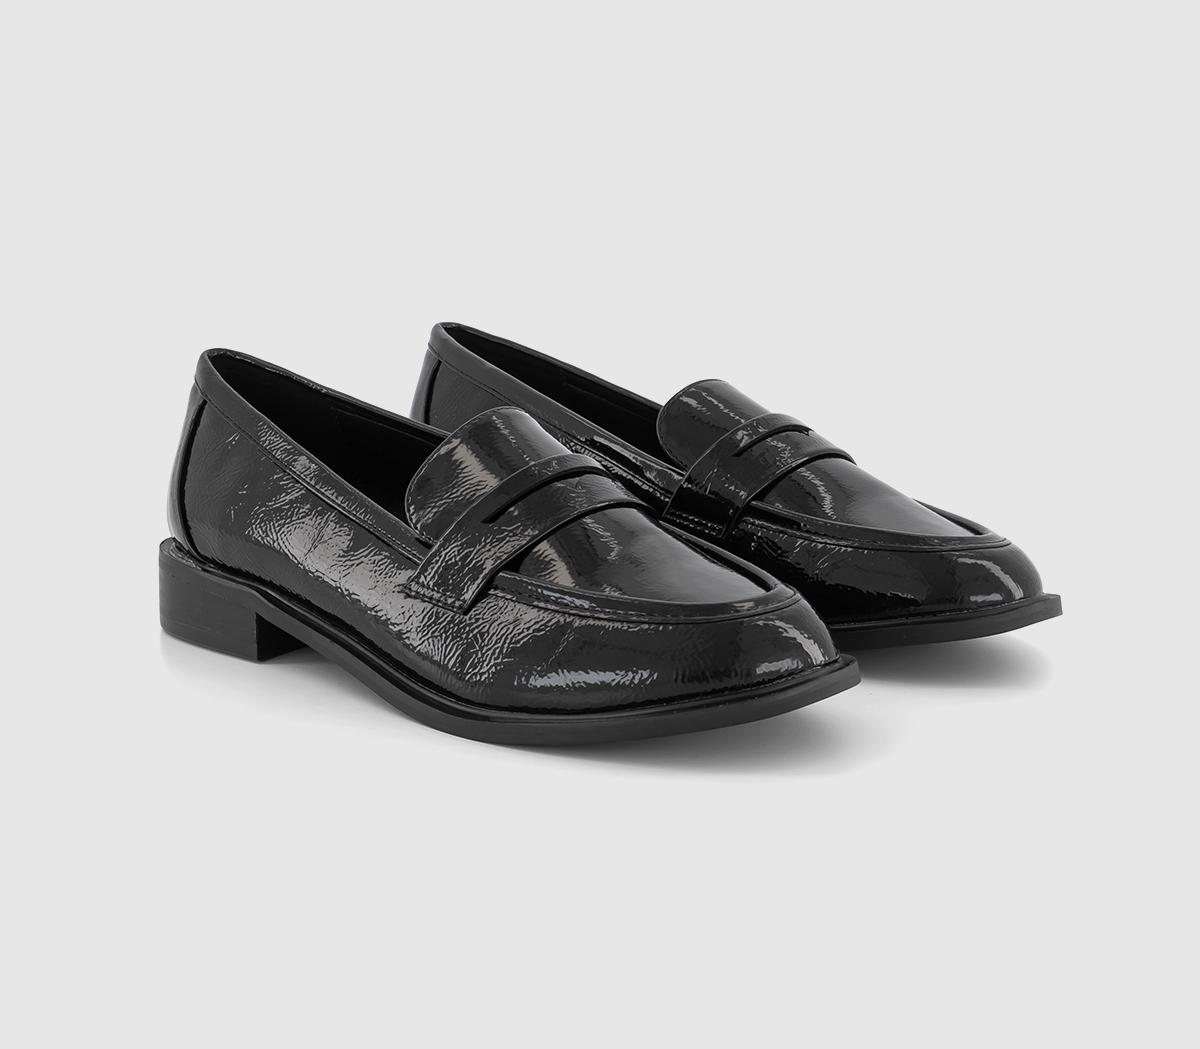 OFFICE Flaming Penny Loafers Black Patent, 3